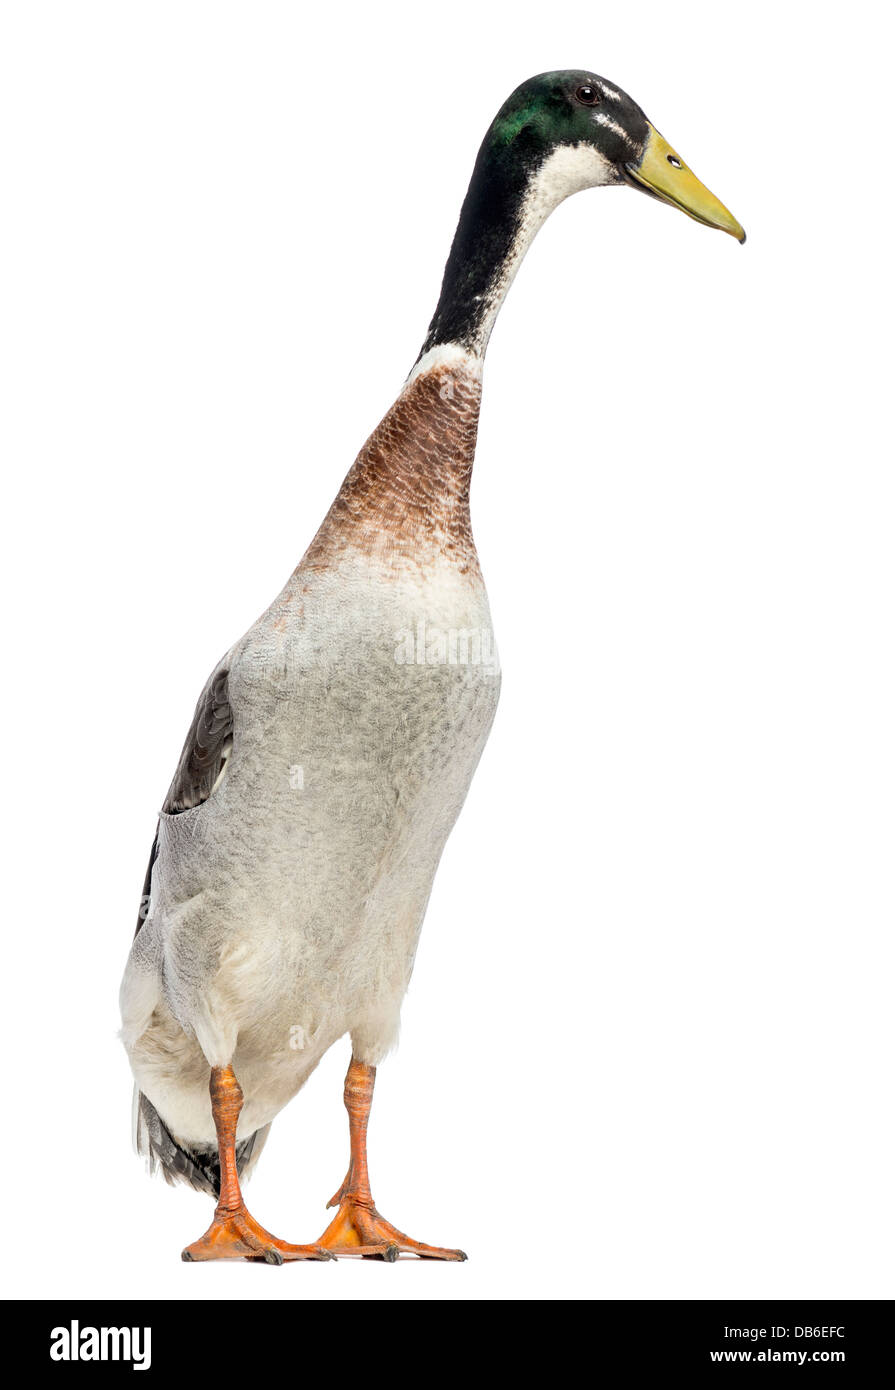 Male Indian Runner Duck, Anas platyrhynchos domesticus, standing against white background Stock Photo